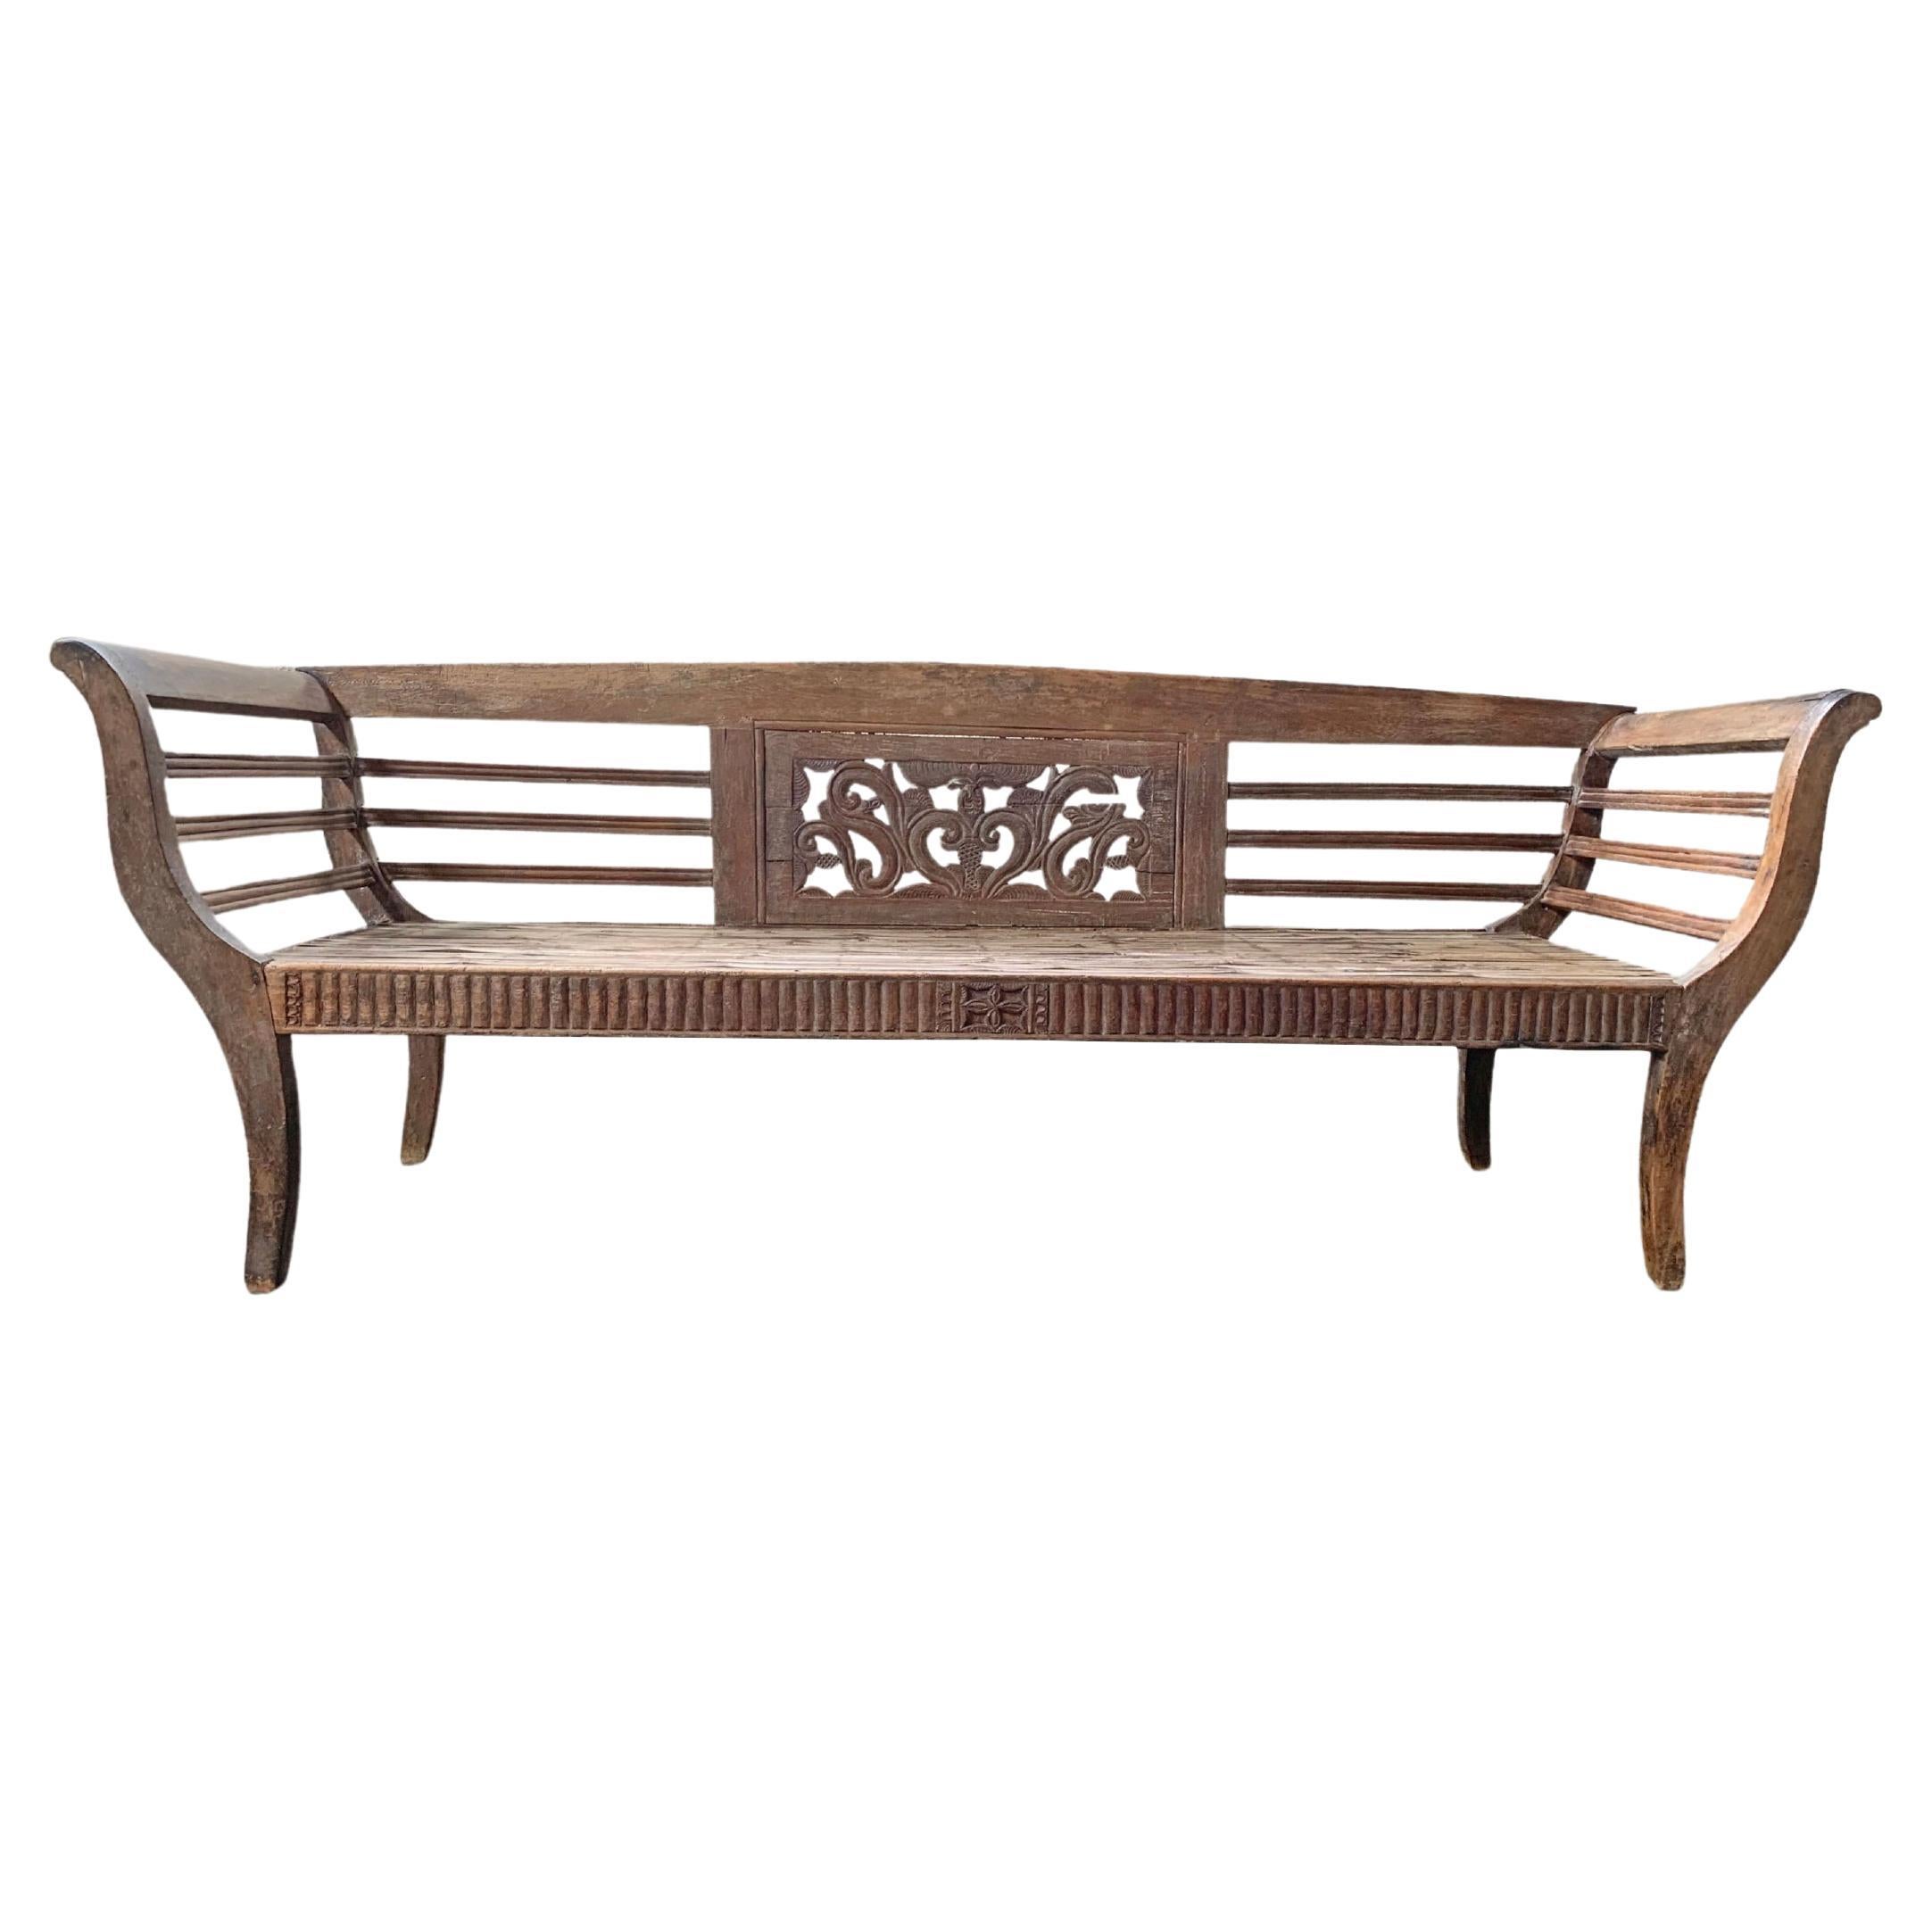 Teak & Bamboo Bench with Carved Detailing Madura Island, Java, Indonesia c. 1950